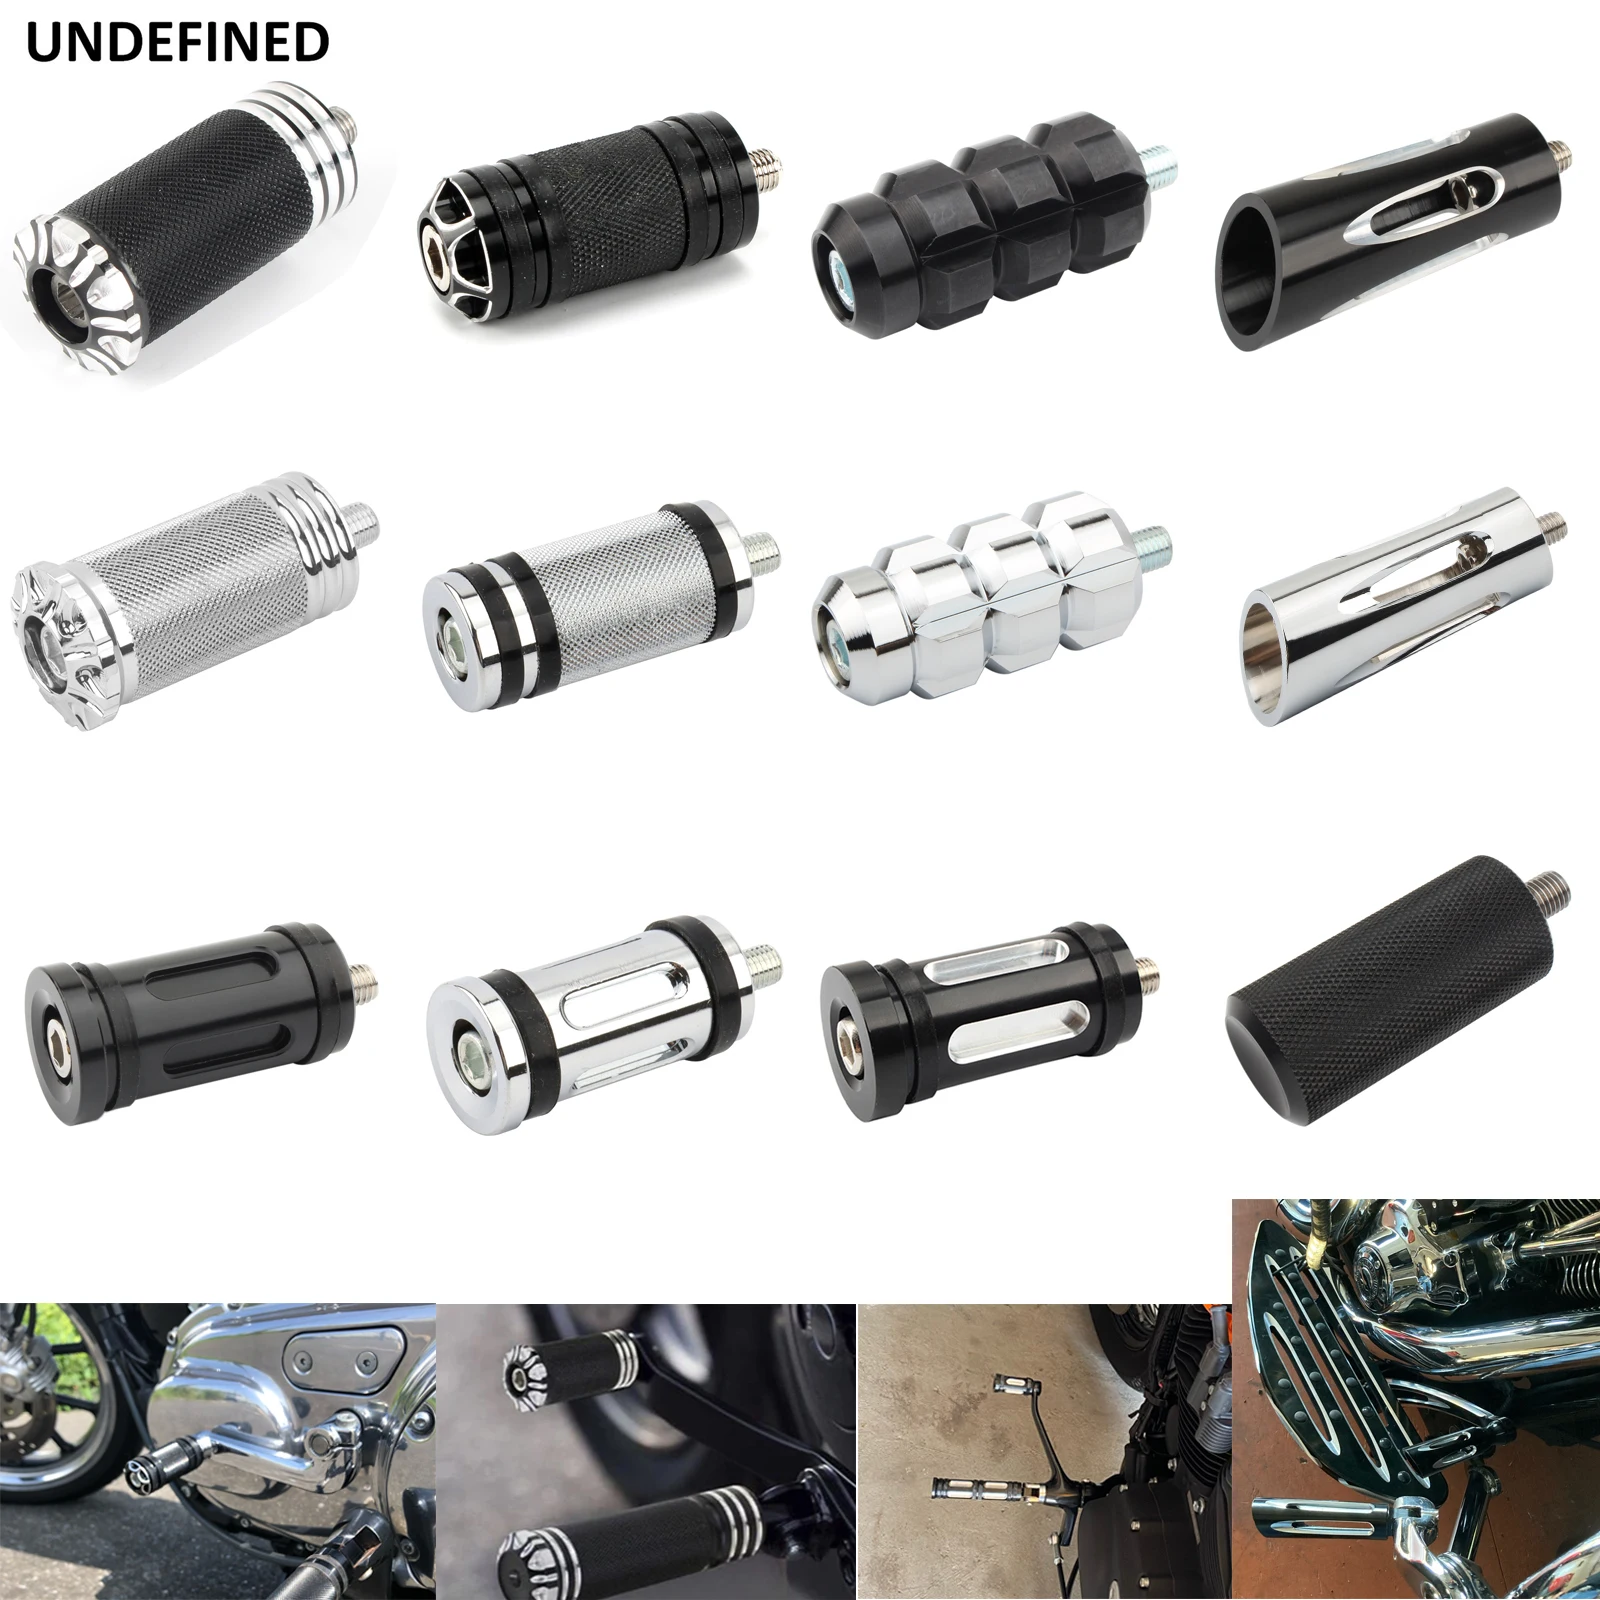 

Motorcycle Gear Shift Lever Shifter Pegs Nail for Harley Sportster 883 1200 XL Softail Breakout Touring Street Glide Dyna FatBob